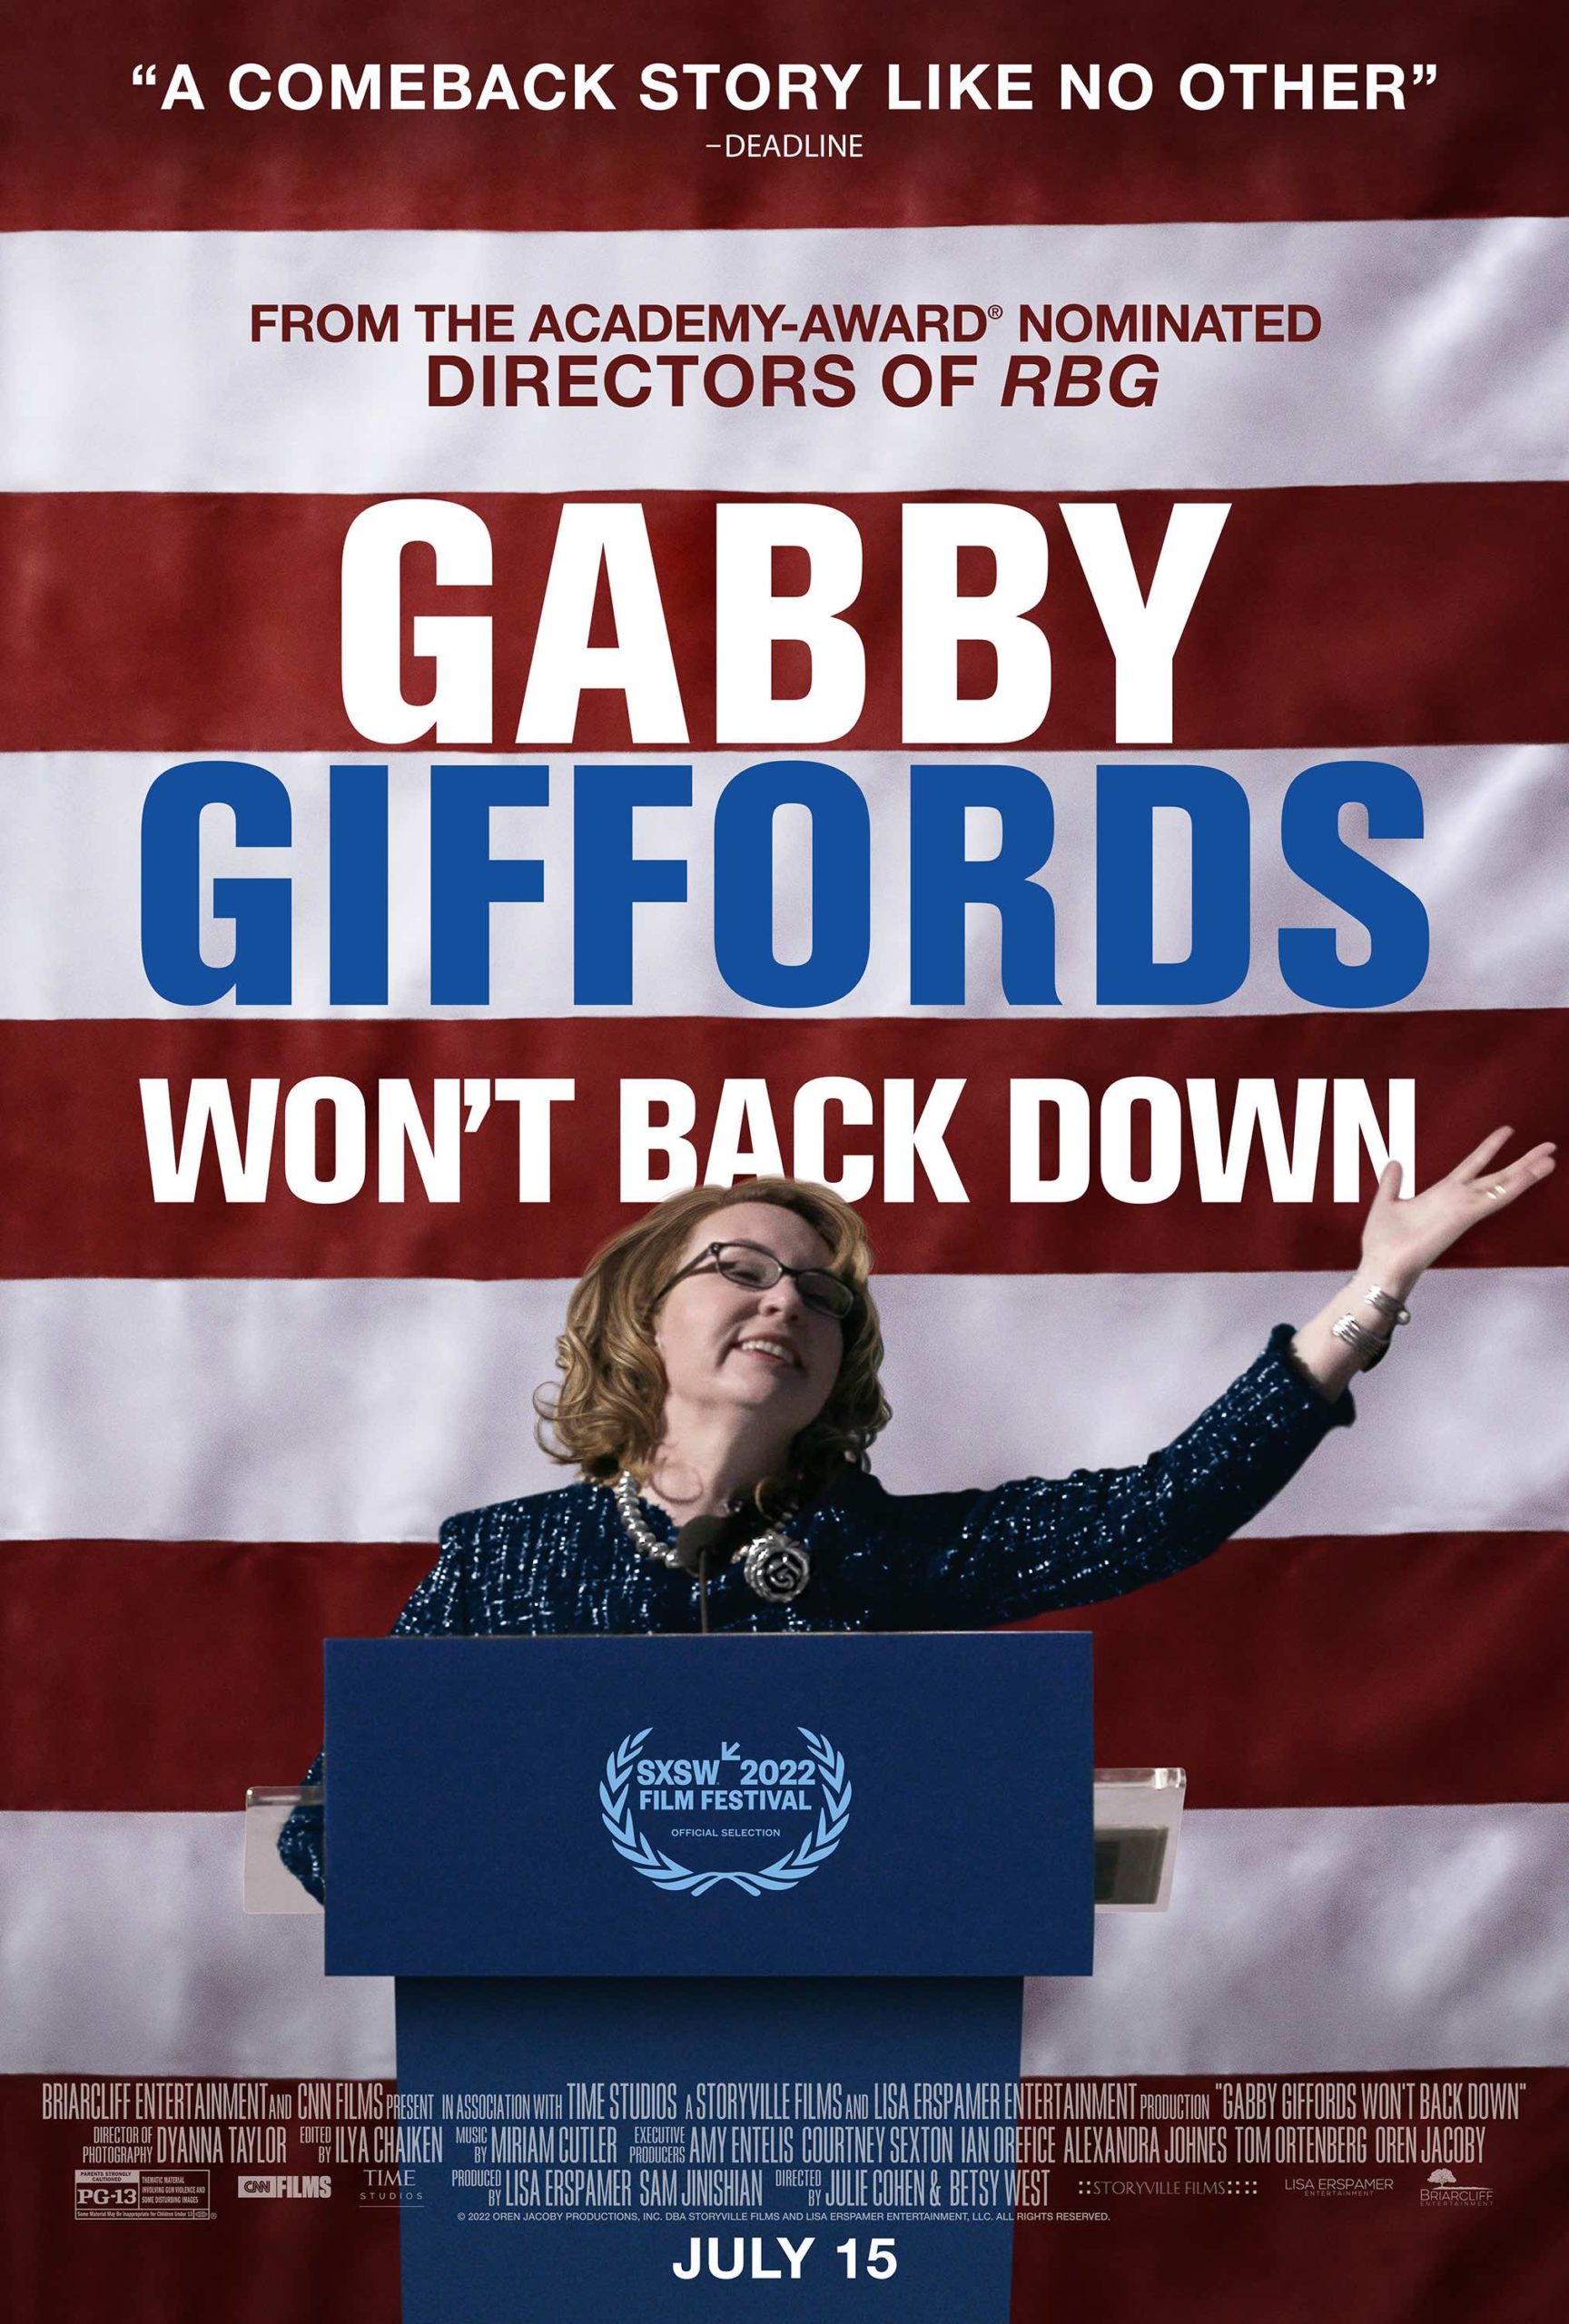 graphic showing Gabby Giffords standing behind a podium gesturing, with the red and white stripes of the American flag behind her. The words "Gabby Giffords Won't Back Down" are give in three lines, all capital letters.